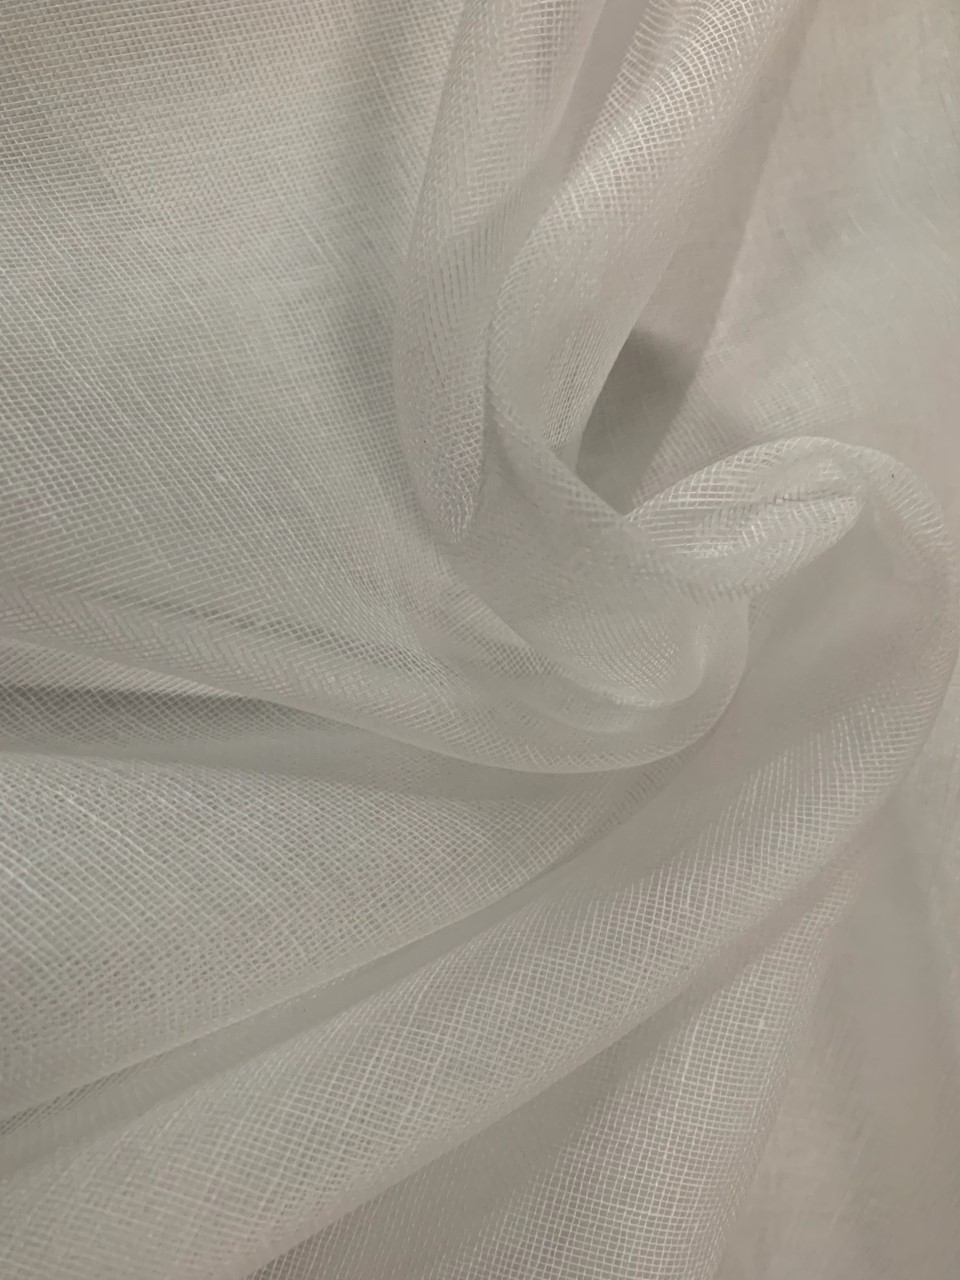 Grade 60 White Cheesecloth Roll - 1000 Yards 30" Wide - Click Image to Close